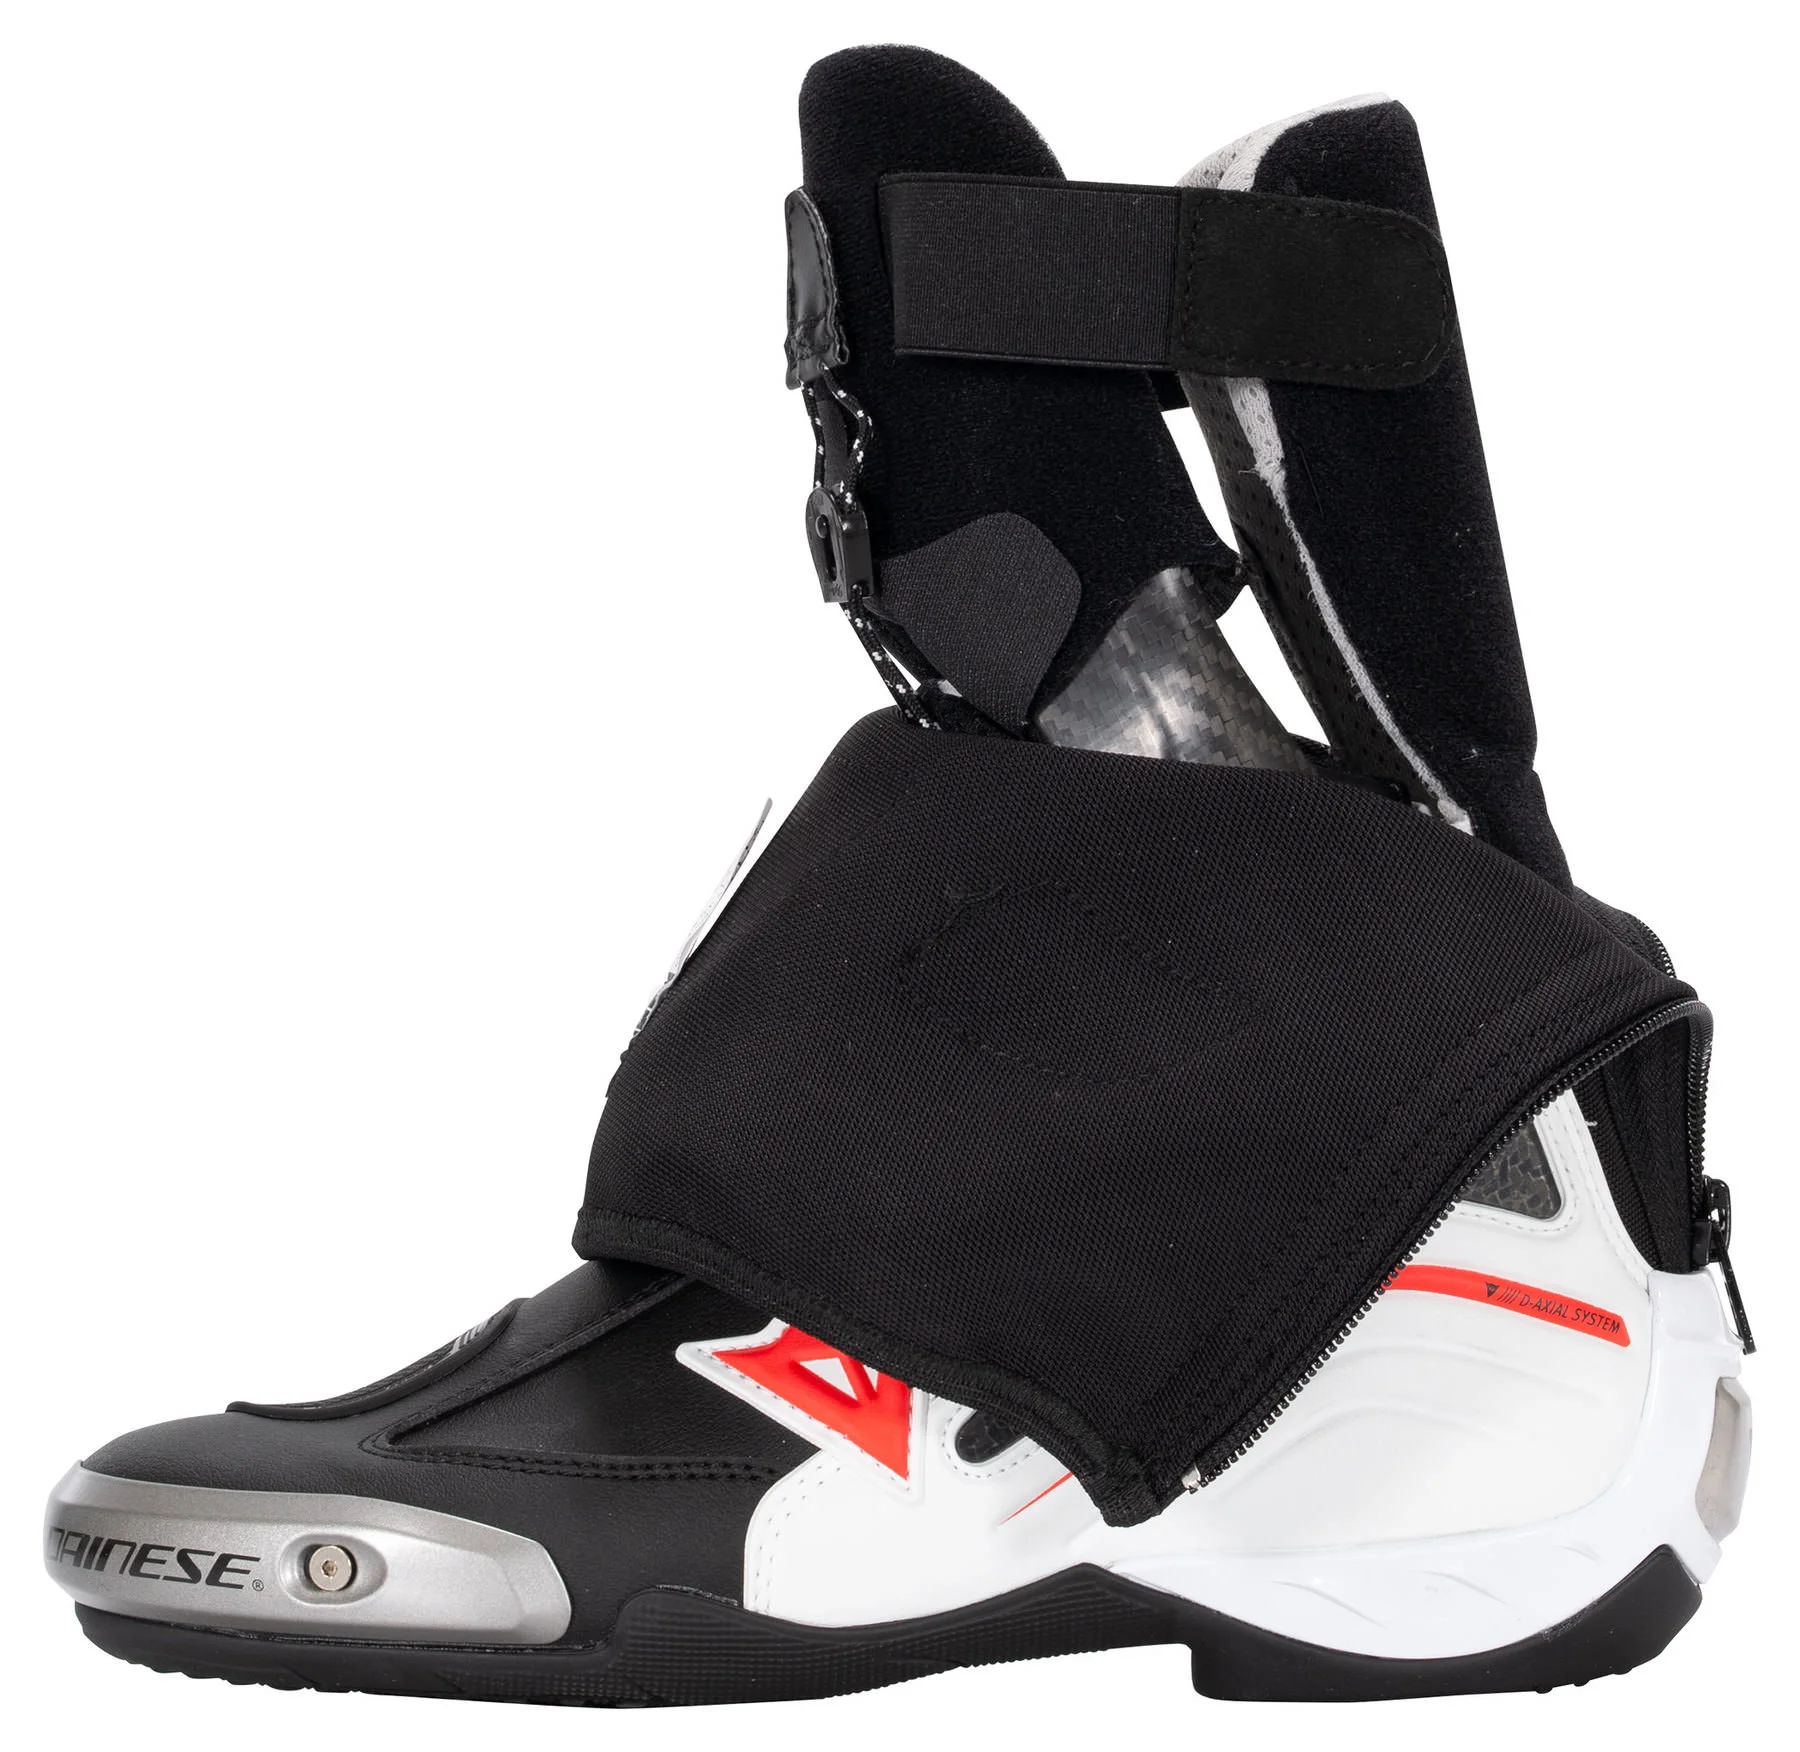 DAINESE AXIAL D1 SIZE 40